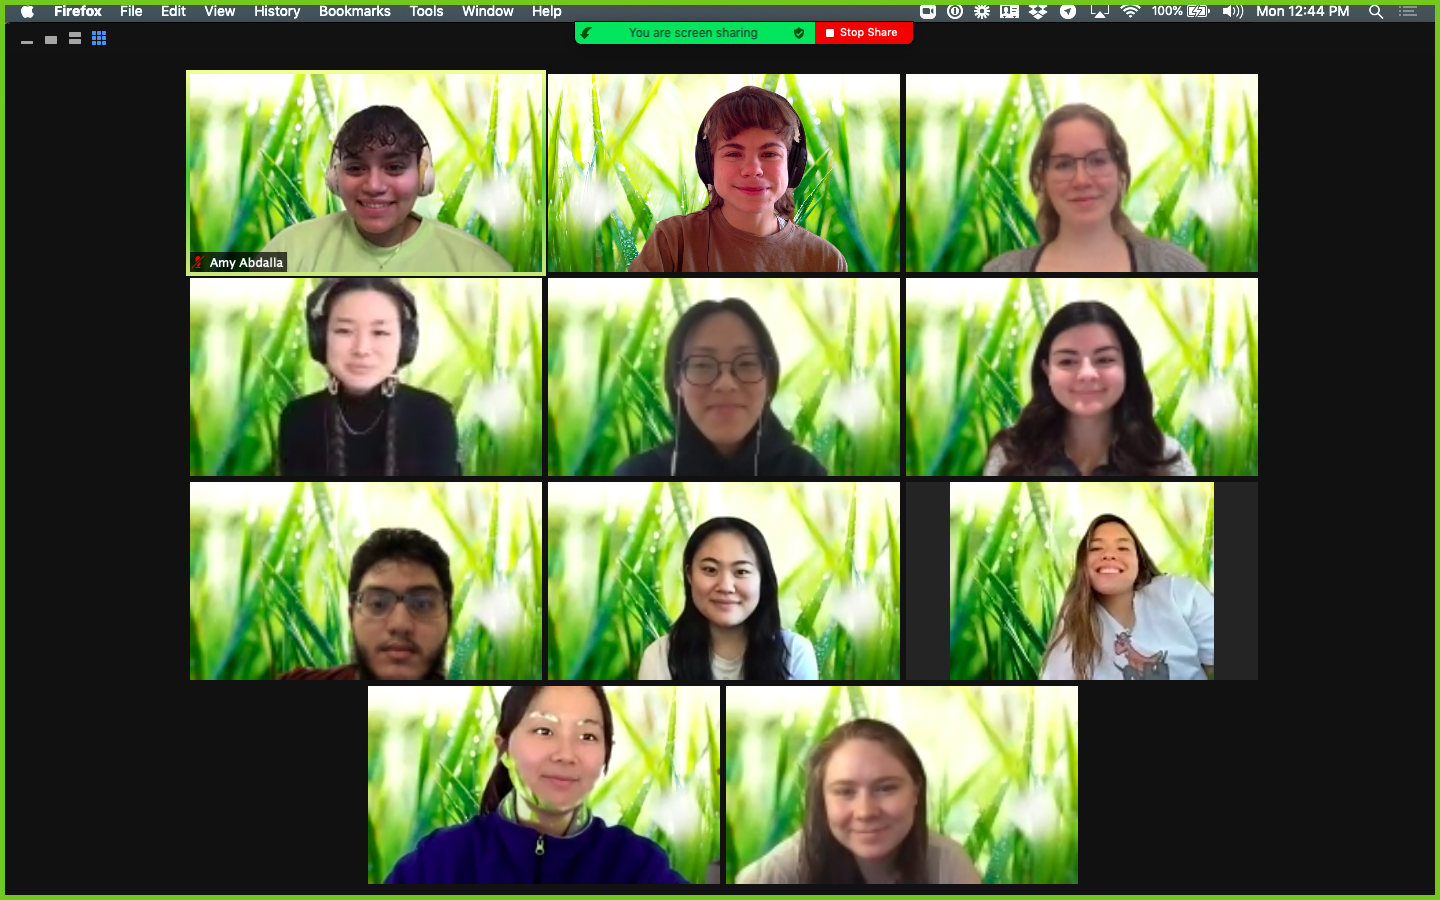 A screenshot of us on our last day in Zoom, you see 10 rectangles of everyone smiling, with springtime grass in the background